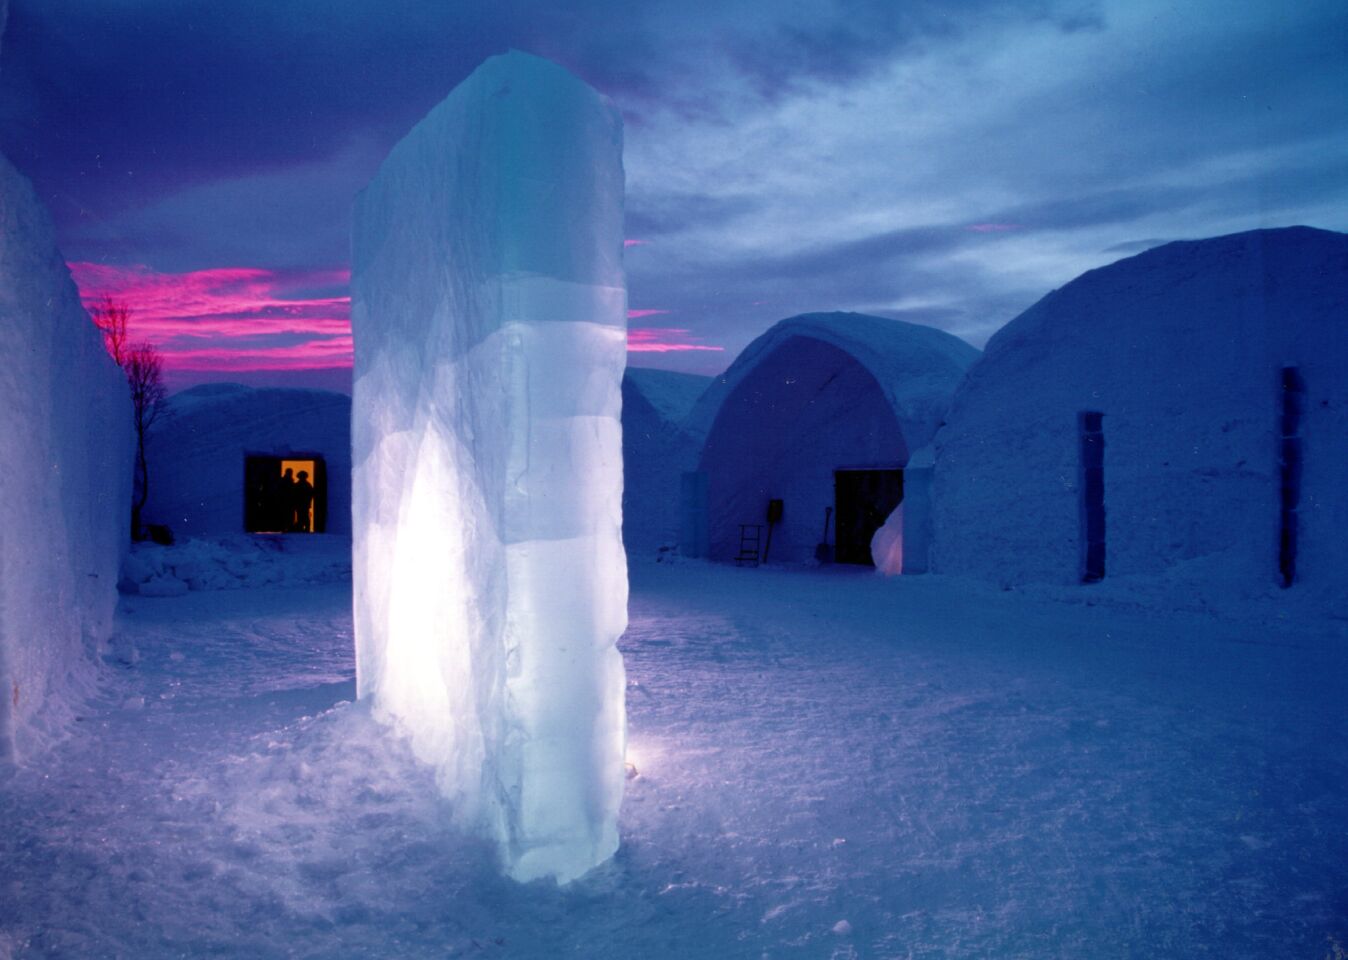 Every winter since about 1990, sculptors have built a hotel and bar made of ice blocks from the nearby Torne River, like this 2003 version. When the spring thaw arrives, the facilities melt. New ones are created the next winter, usually opening in early December. -- Susan Spano